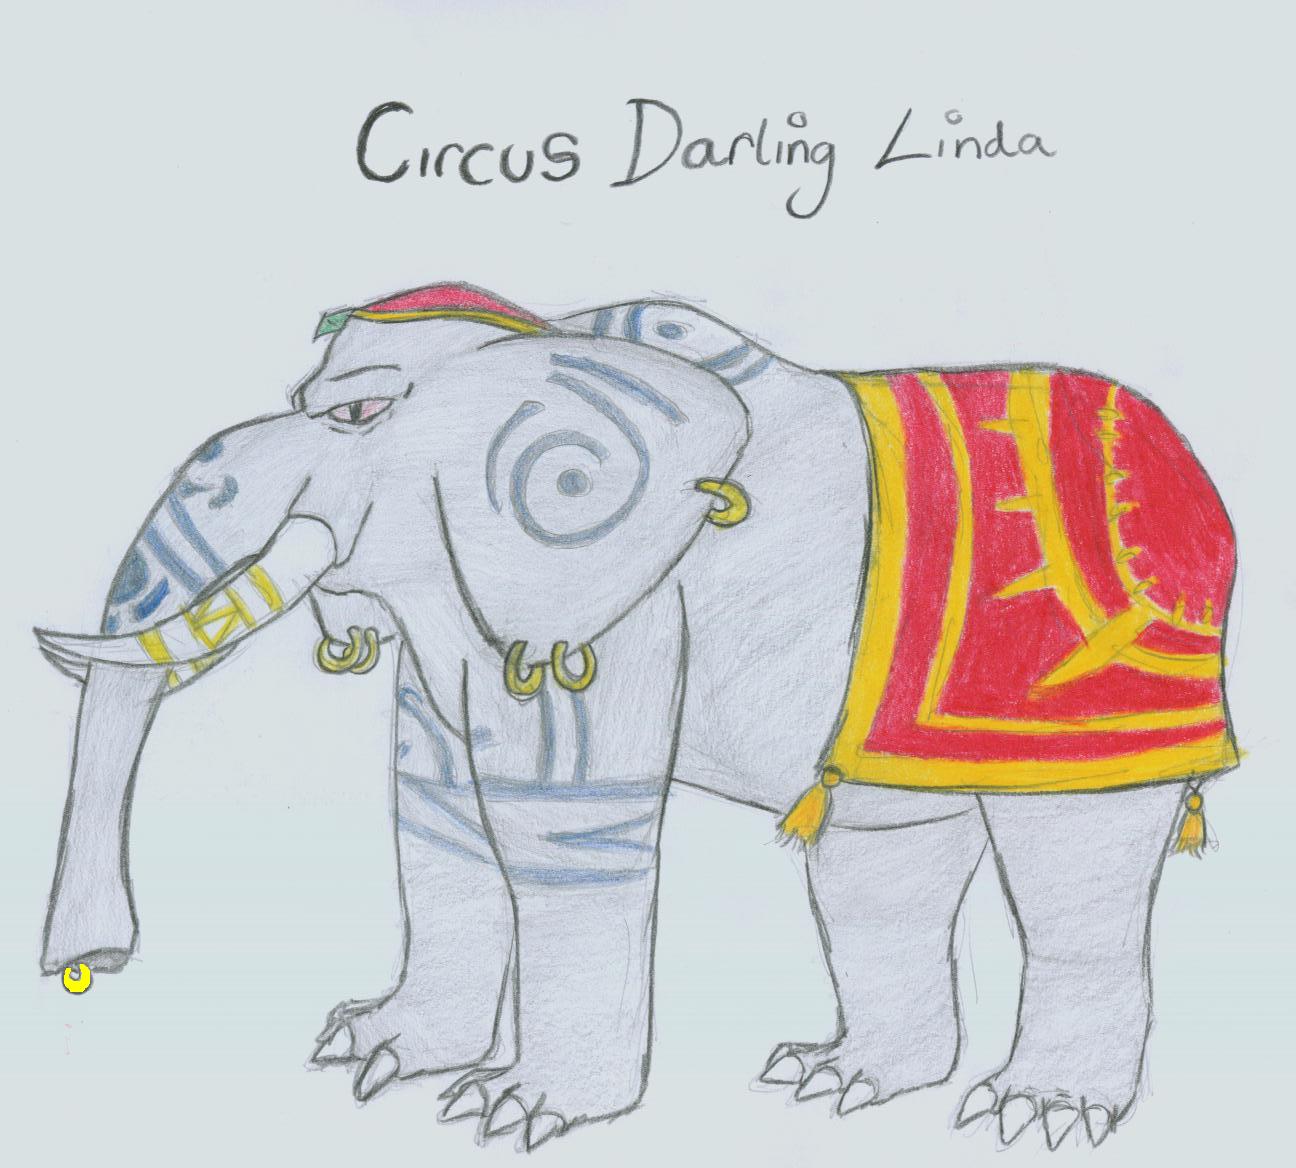 Circus Darling Linda by Frost_Dragon